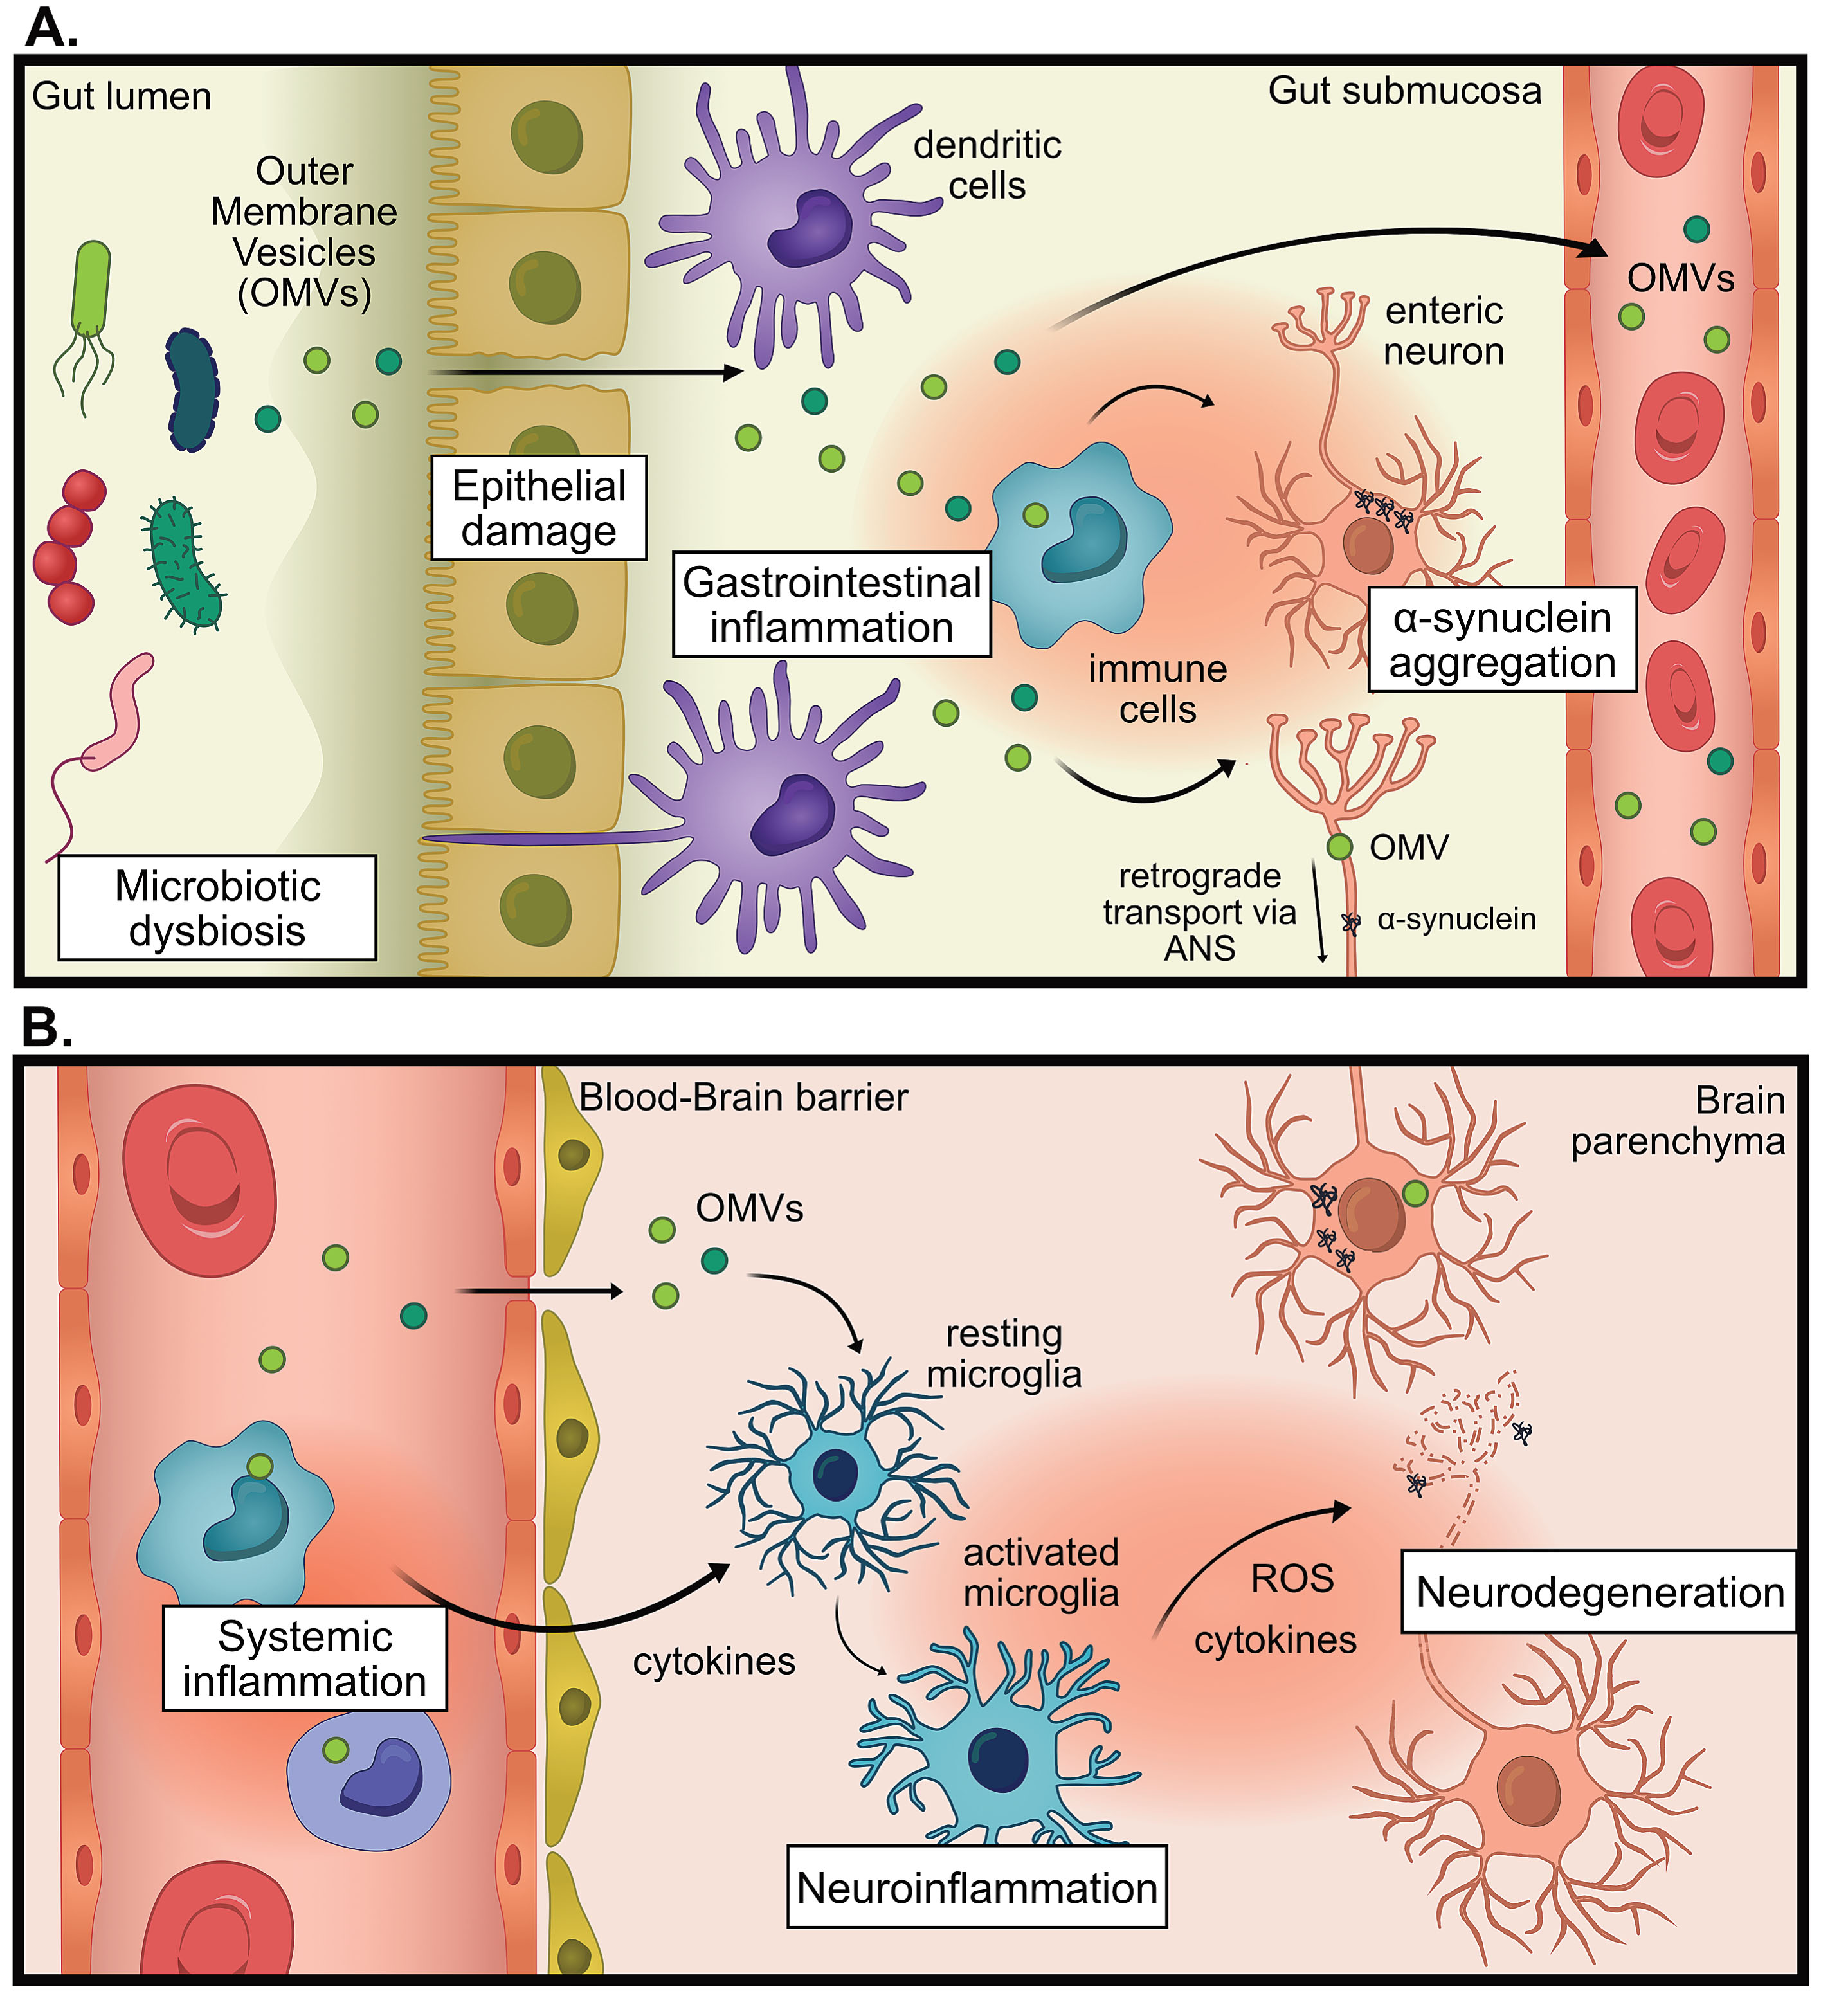 The proposed hypothesis for the pro-inflammatory role of outer membrane vesicles (OMVs) in Parkinson’s disease (PD). A) In states of microbial dysbiosis, OMVs and other microbial factors can cause damage to epithelial barriers, causing the translocation of OMVs past the epithelium, where immune cells can be activated to promote gastrointestinal inflammation which increases intestinal permeability. Information about gastrointestinal inflammation can be directly communicated to the brain via the autonomic nervous system (ANS), by altering neural signaling or retrograde transport of pathogenic proteins (for example α-synuclein) or OMVs. B) OMVs reach the systemic circulation whereby they promote systemic inflammation. OMVs could promote neuroinflammation indirectly via increasing systemic inflammation, leading to weakening of the blood-brain barrier, entry of immune cells into the brain and increased cytokine signaling. OMVs could also promote neuroinflammation directly by infiltrating the brain and activating microglia. This chronic inflammation can contribute to neurodegeneration.